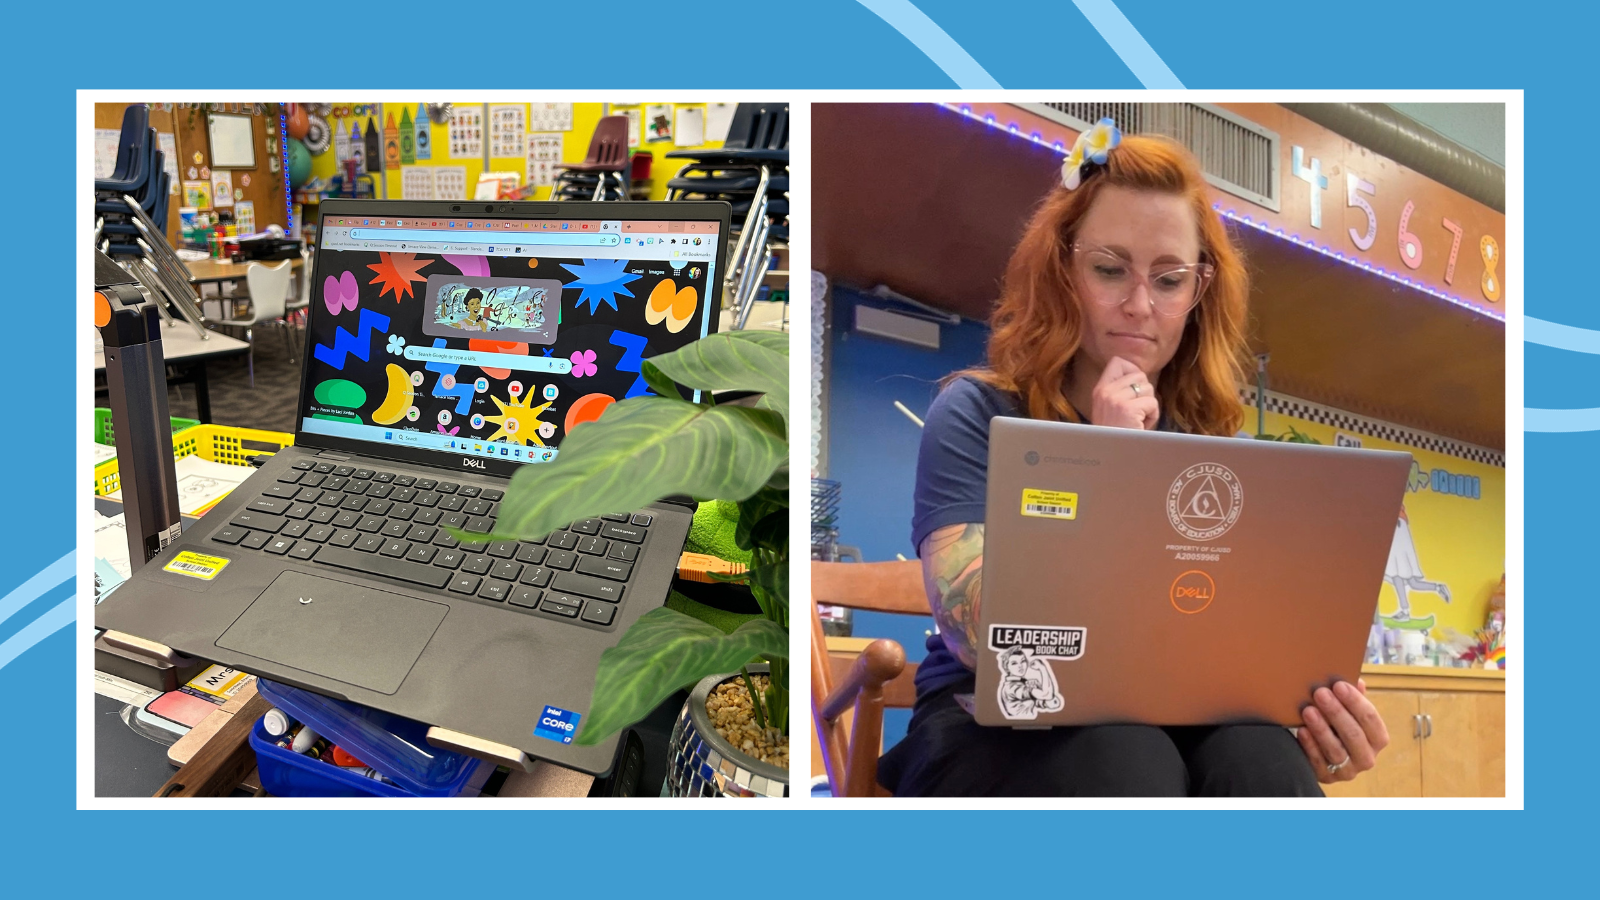 Google Chromebook feature image of a teacher using her Chromebook and a Chromebook open to the Google homepage